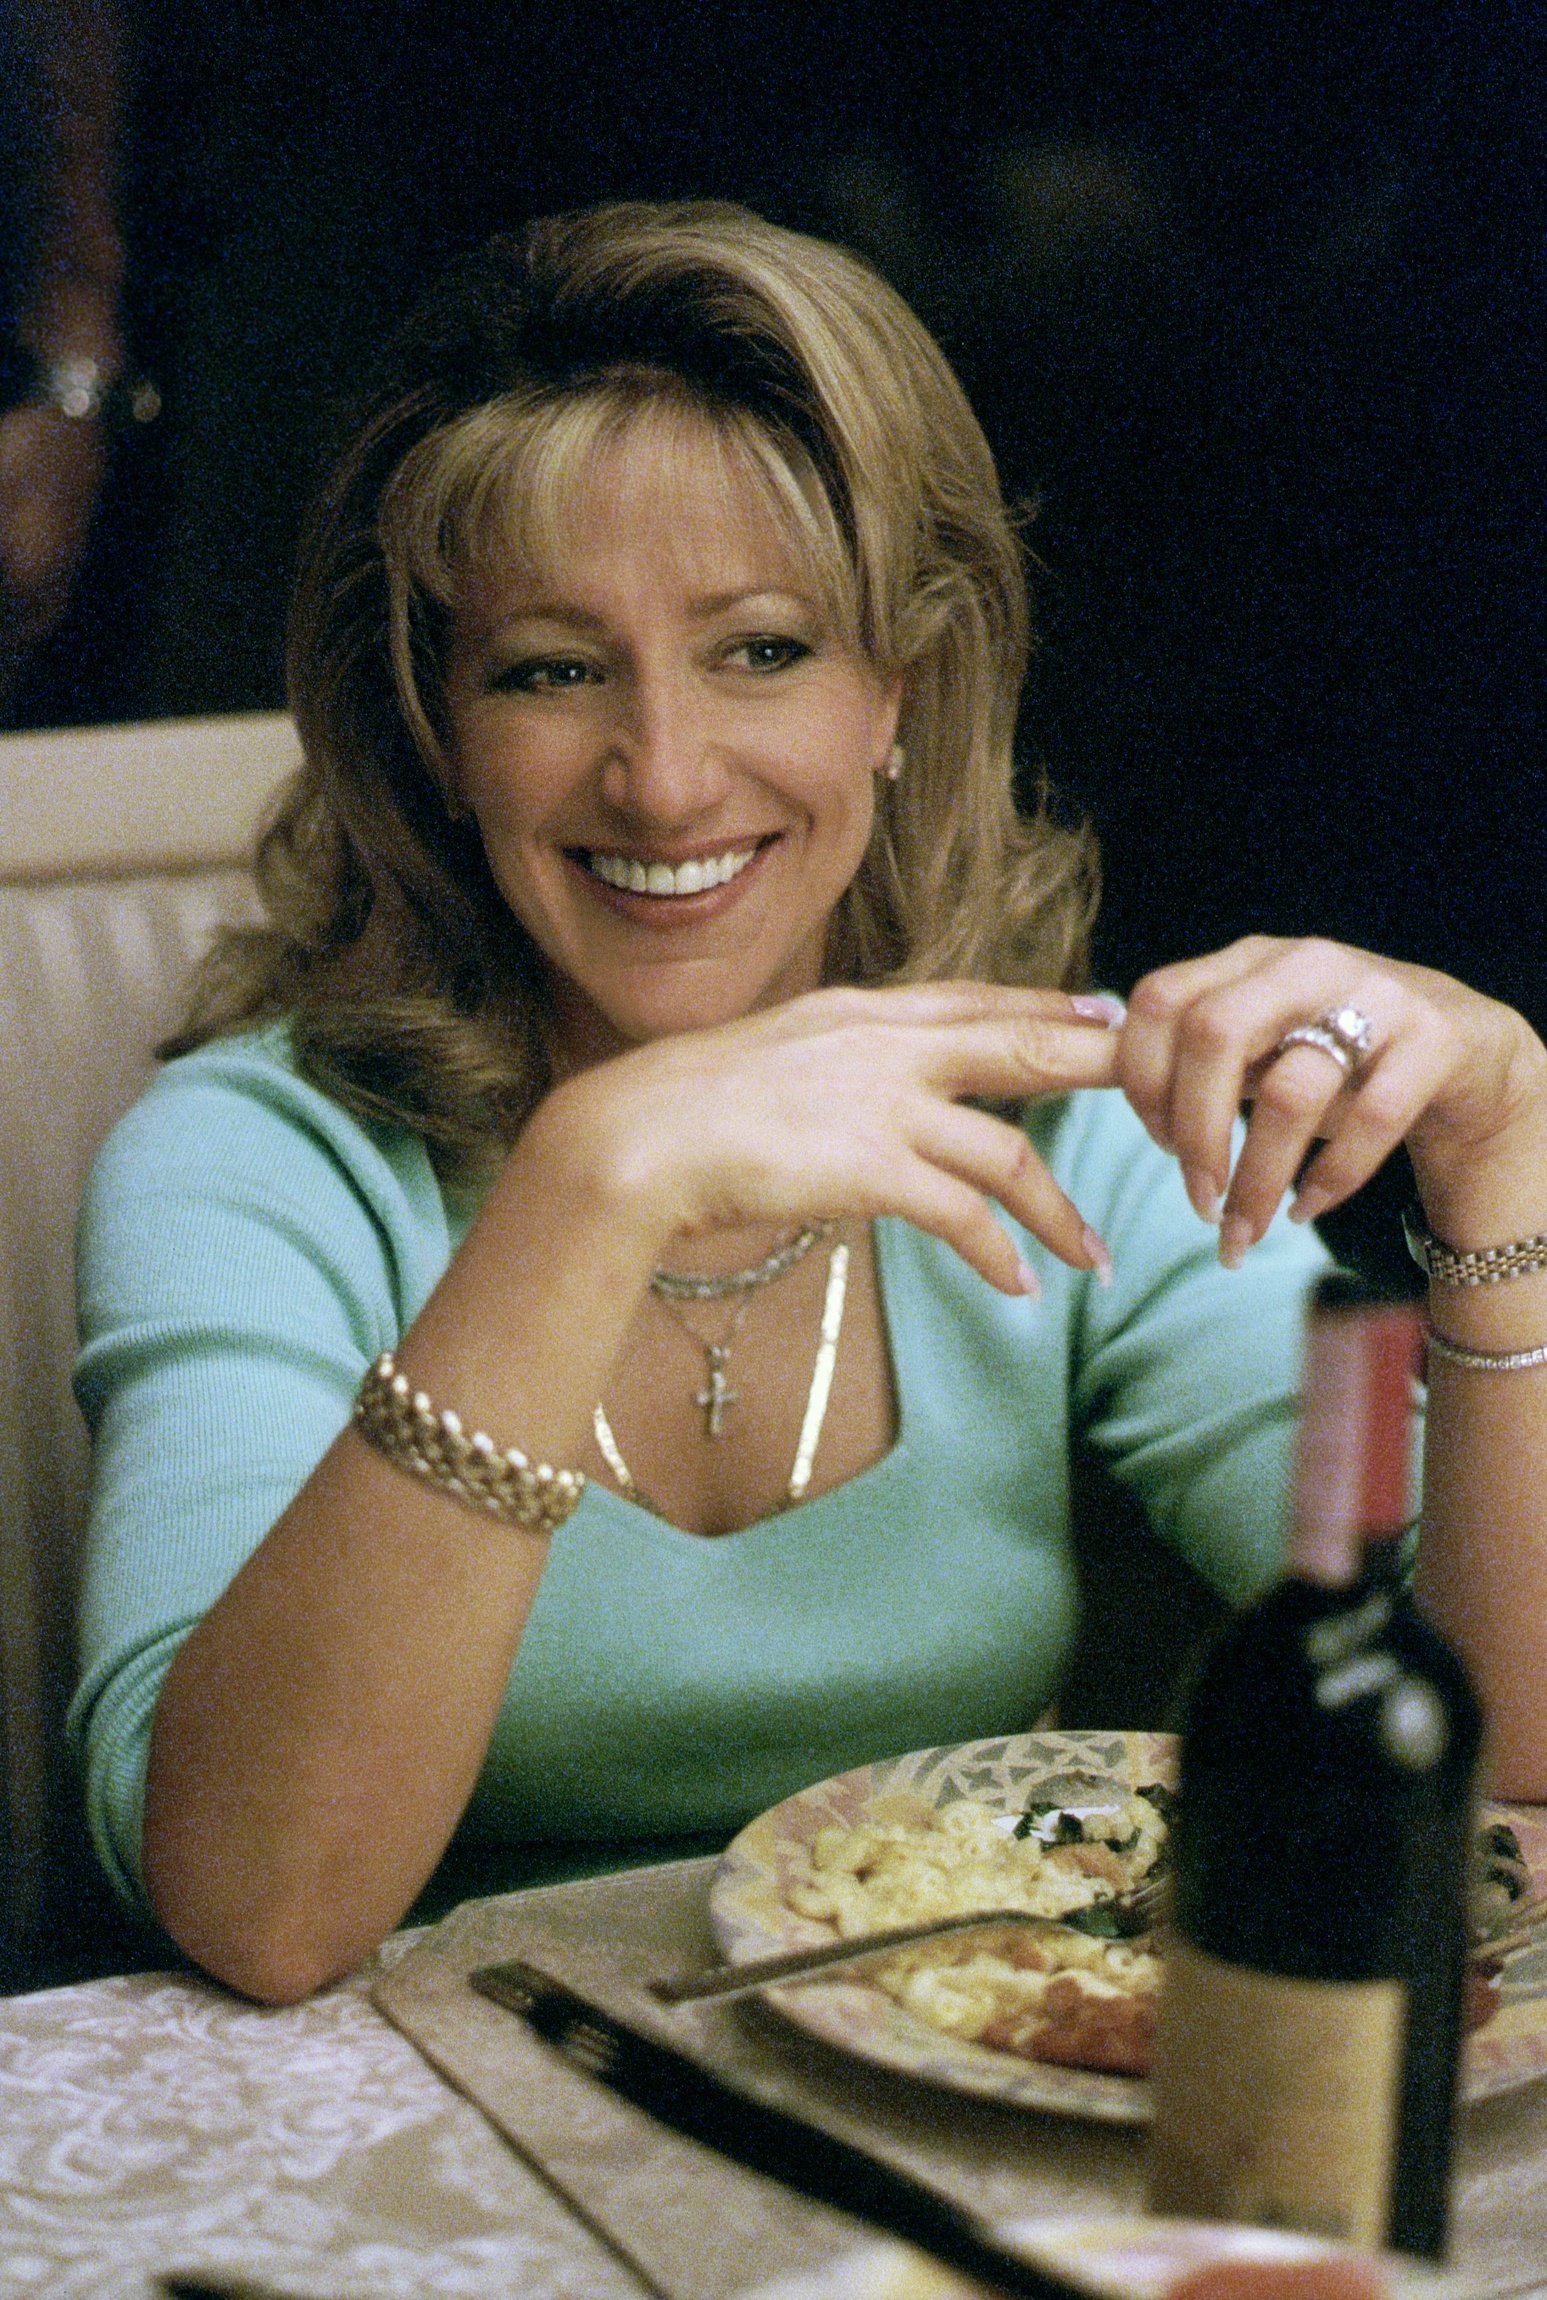 Edie Falco continued filming "The Sopranos" after being diagnosed with breast cancer. (Getty Images)